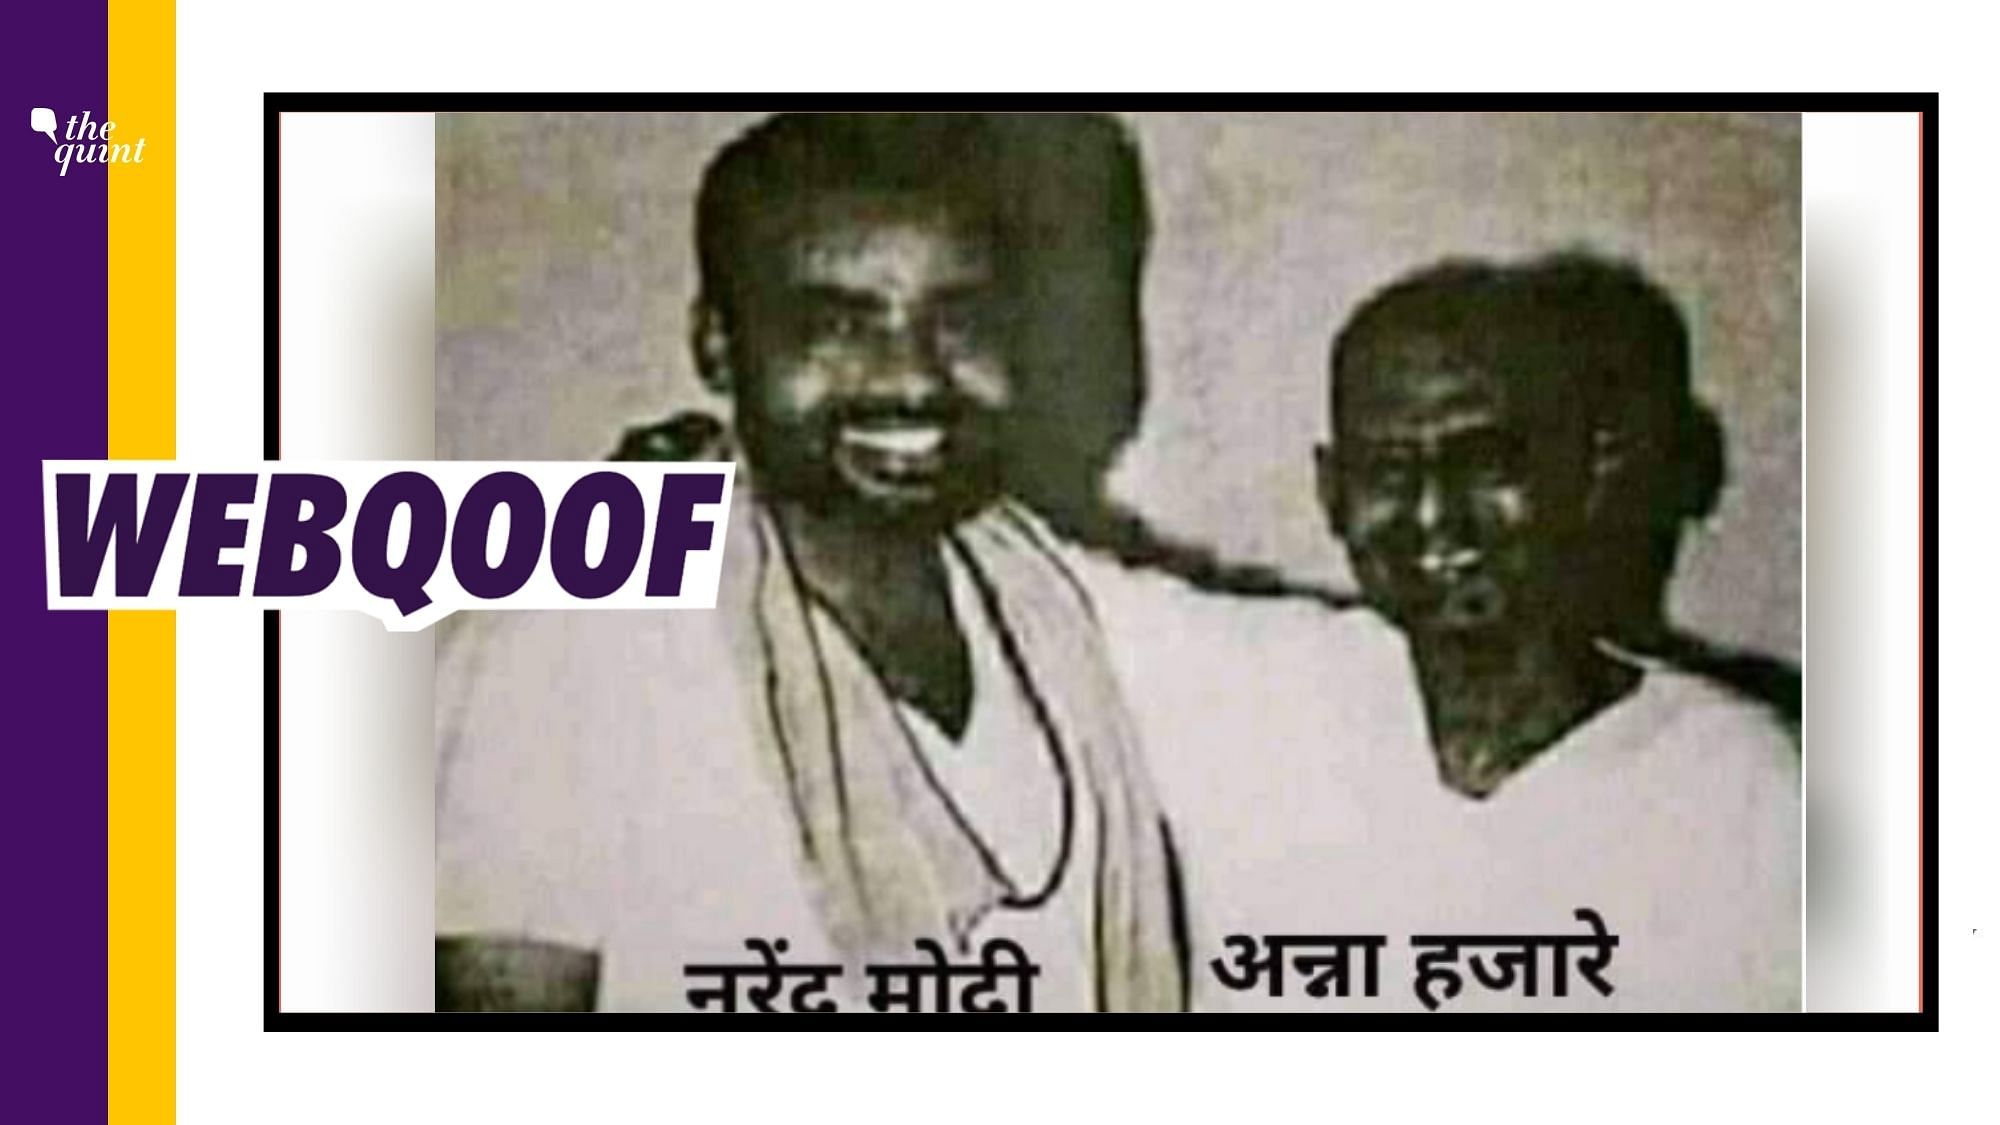 Modi’s RSS mentor, Inamdar, has been misidentified as Anna Hazare in the viral image to make false claims.